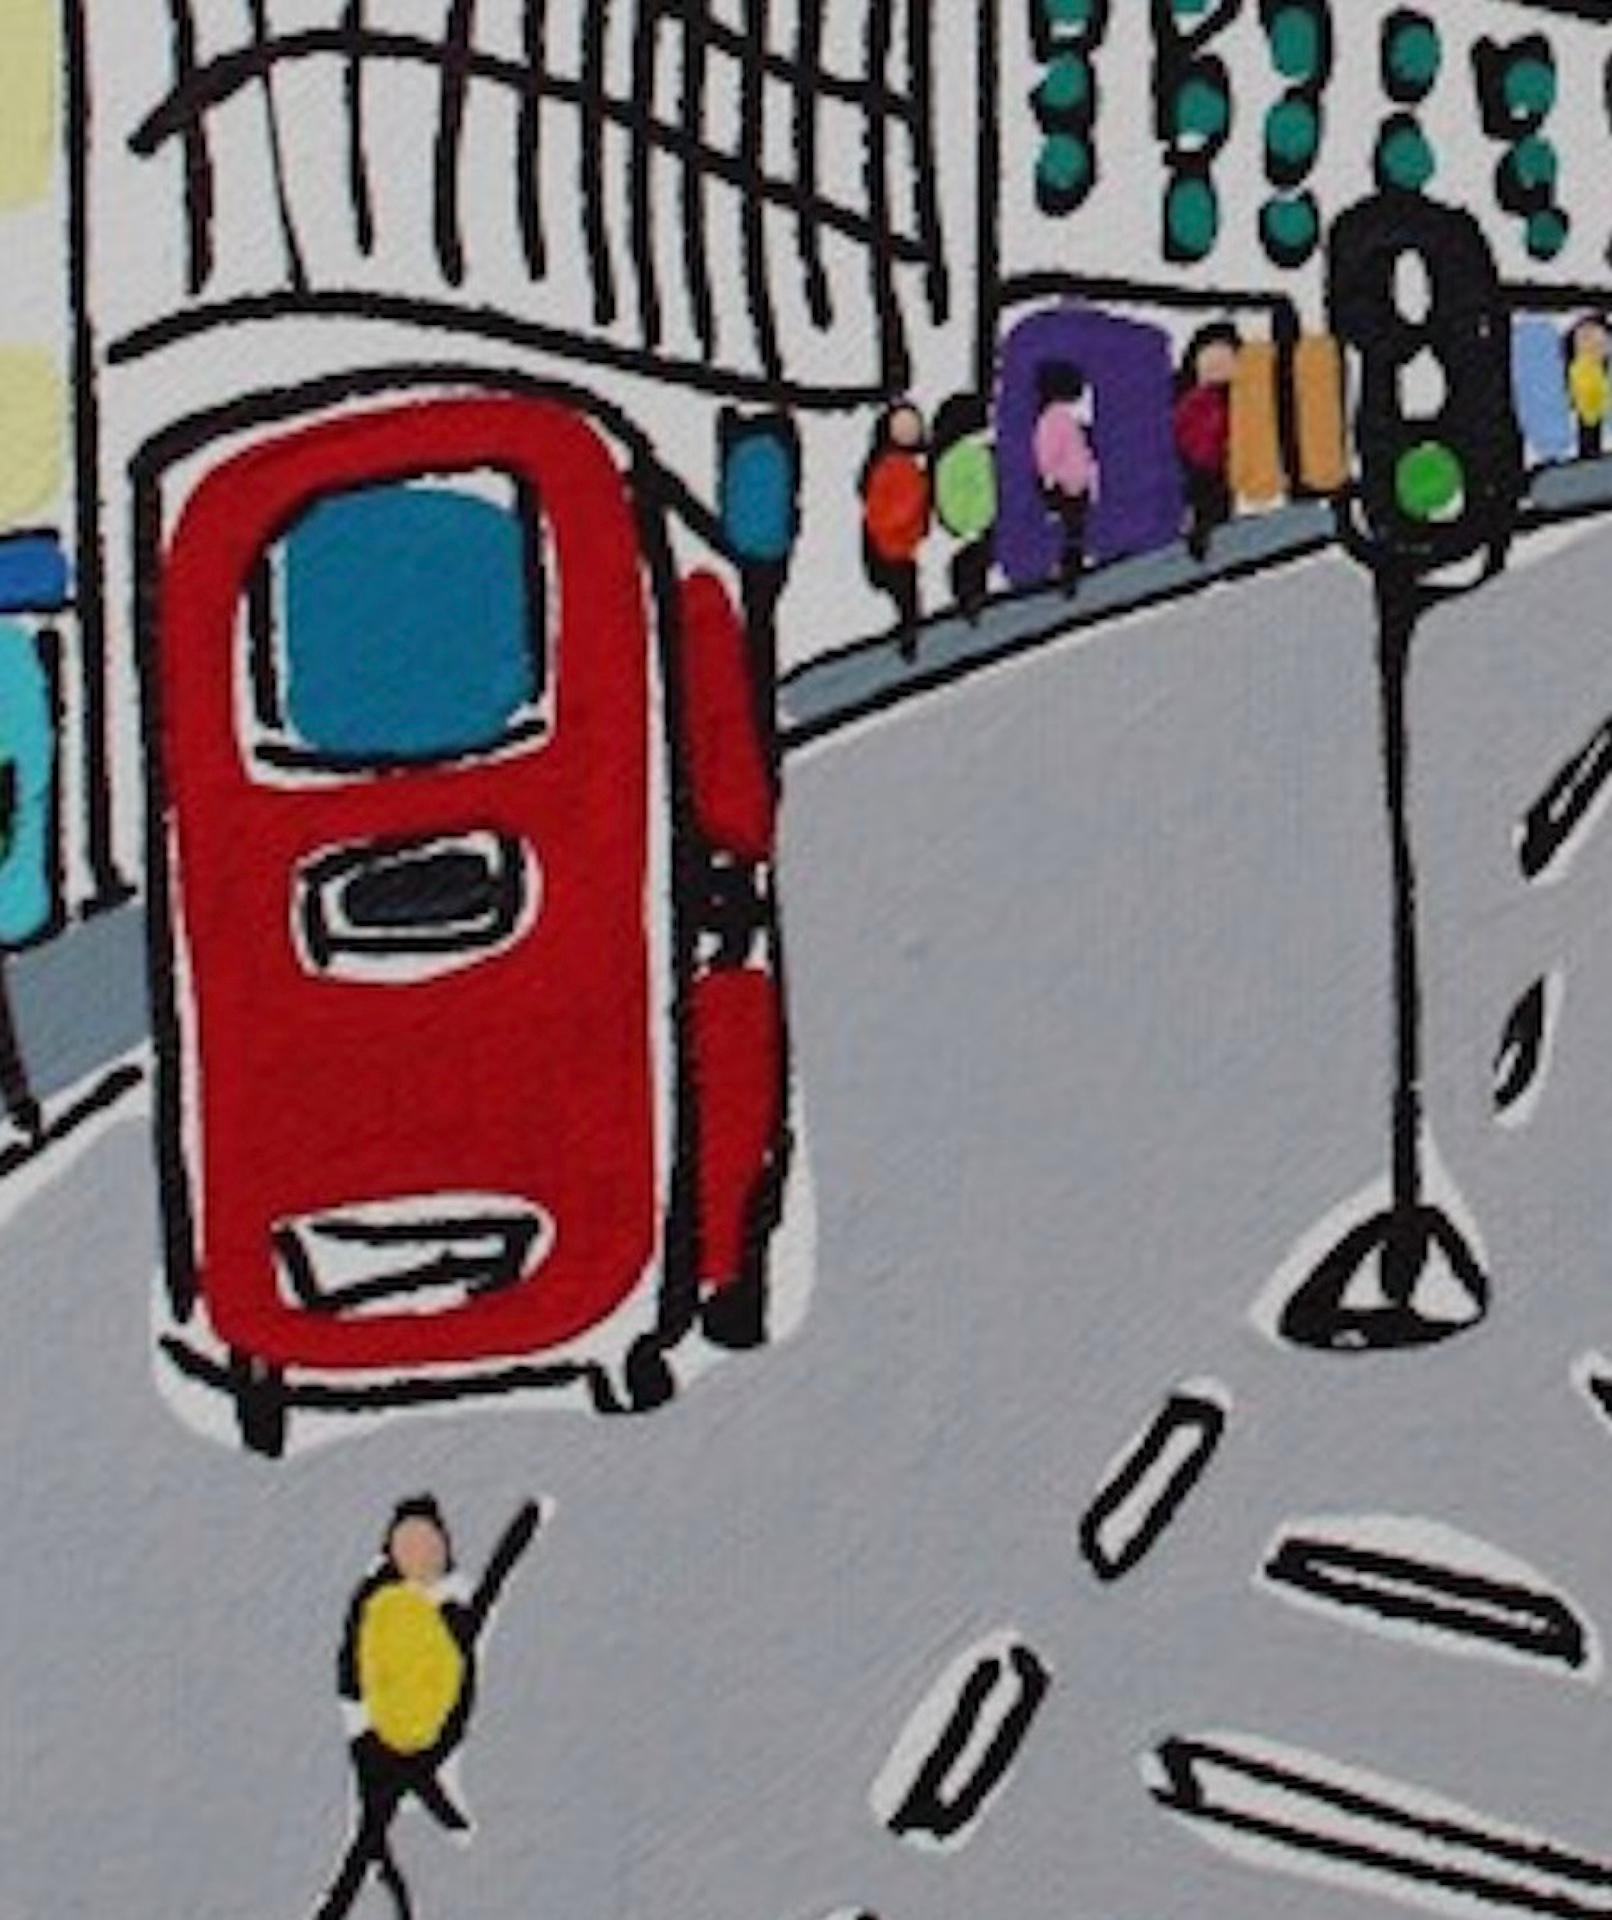 Mini Ludgate Hill Morning [2021]
original

Acrylic on Canvas

Image size: H:30 cm x W:25 cm

Complete Size of Unframed Work: H:30 cm x W:25 cm x D:4cm

Sold Unframed

Please note that insitu images are purely an indication of how a piece may